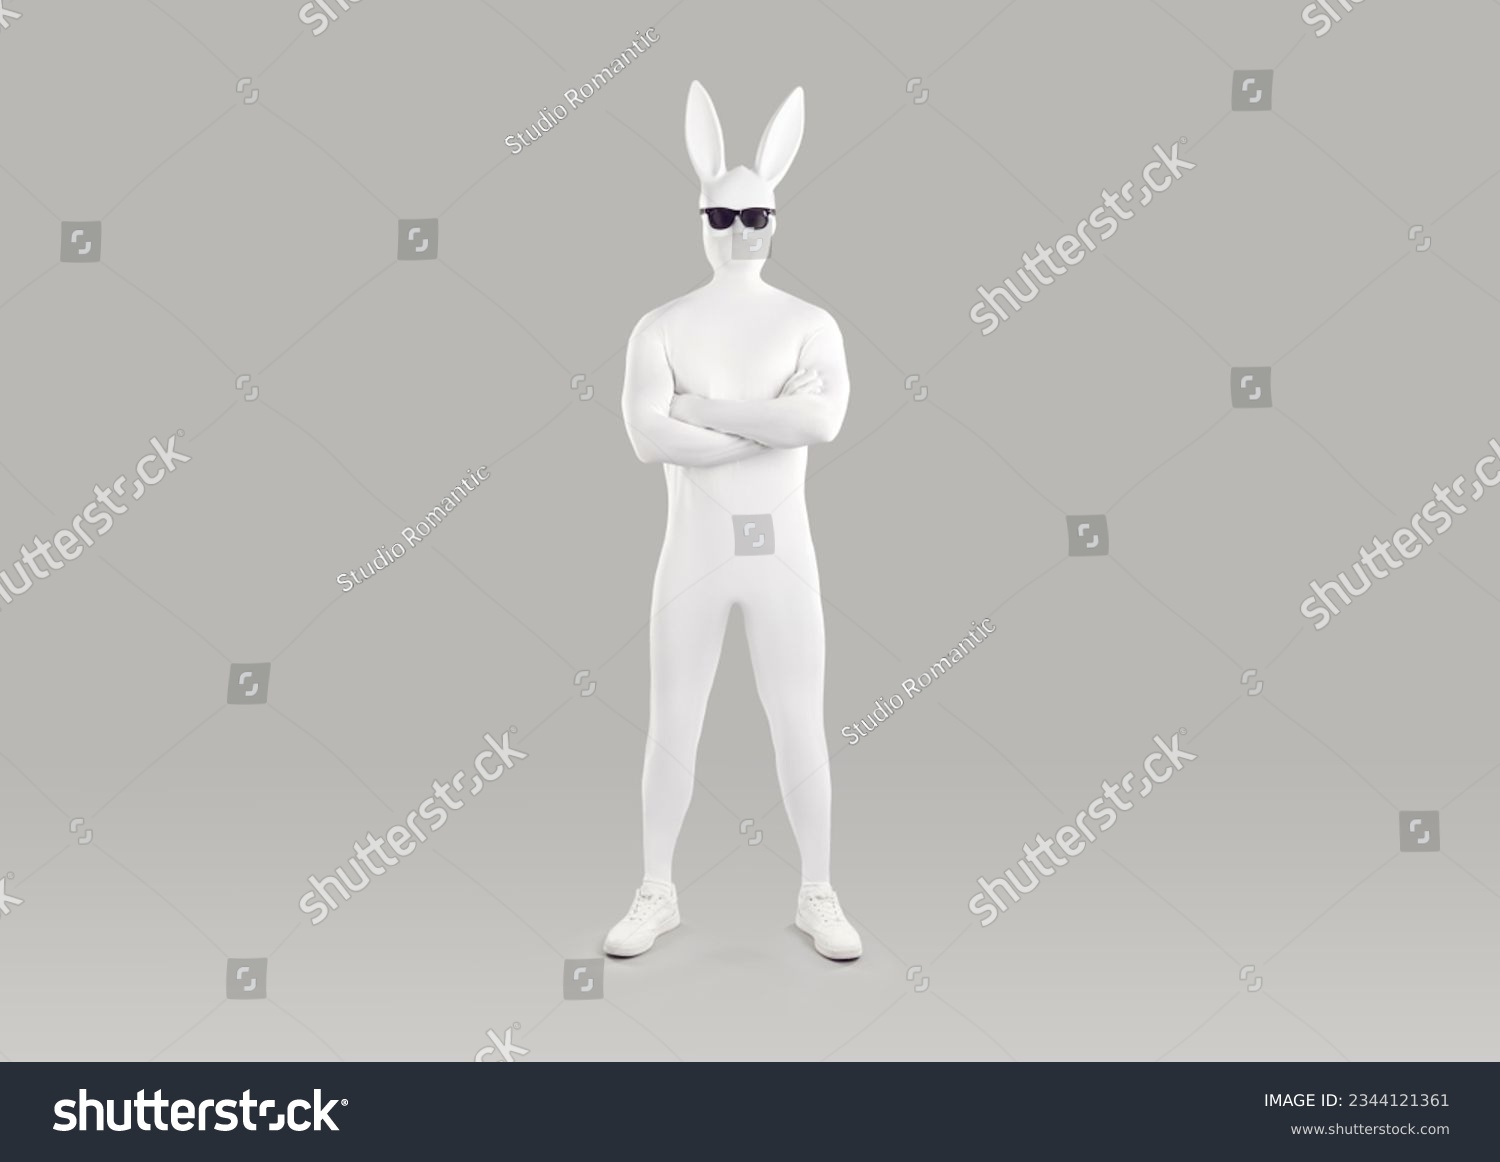 Full length portrait of faceless unrecognizable person in white spandex costume, hare mask with long ears and black glasses. Incognito funny man in bodysuit with crossed arms on grey background. #2344121361